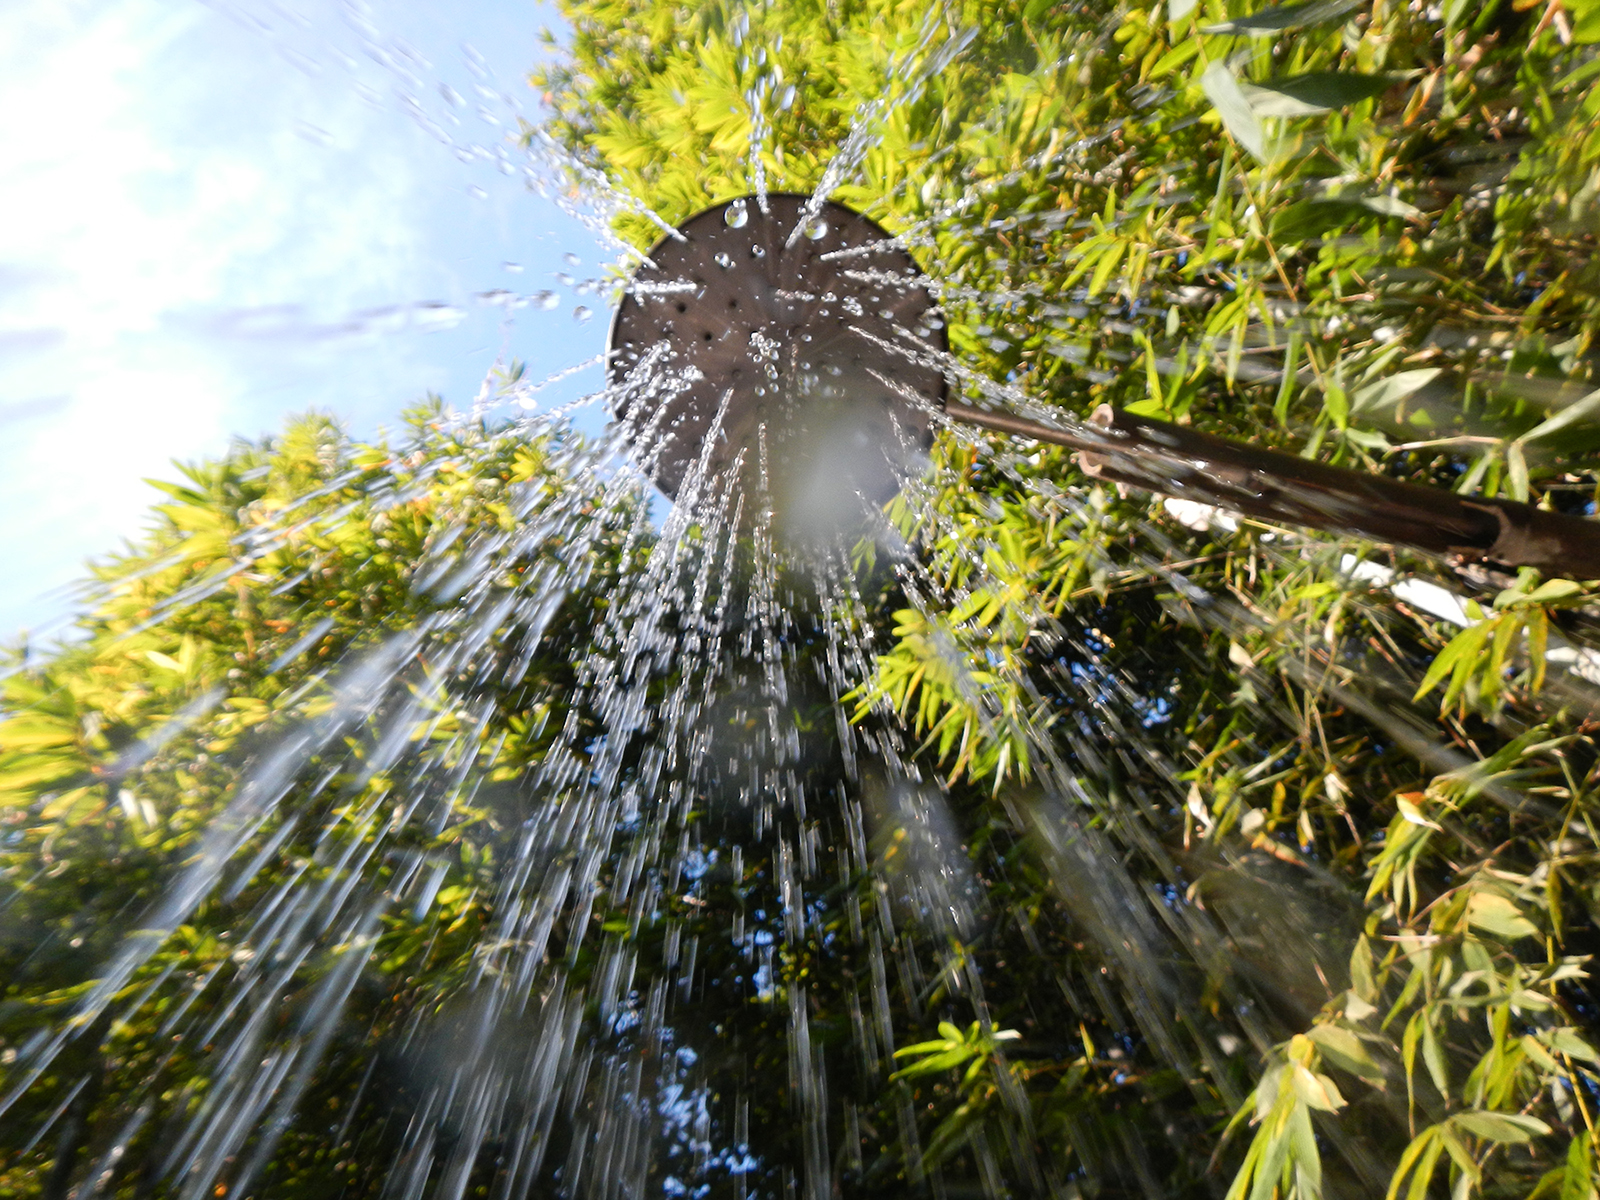 How to Build an Outdoor Shower